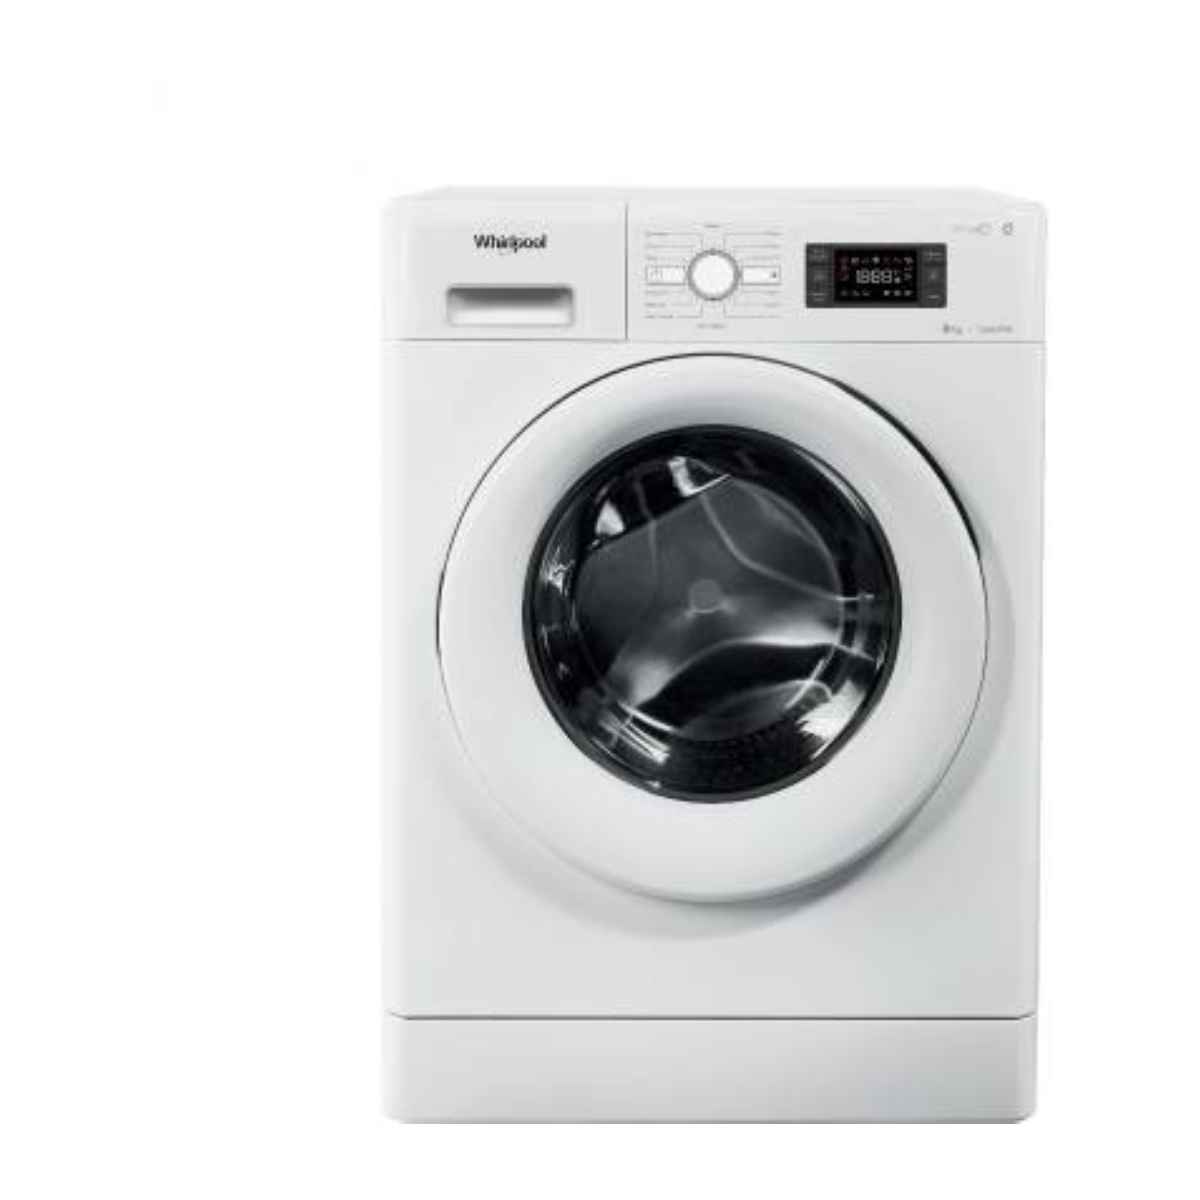 Whirlpool 8 kg Fully Automatic Front Load Washing machine (Fresh Care 8212)